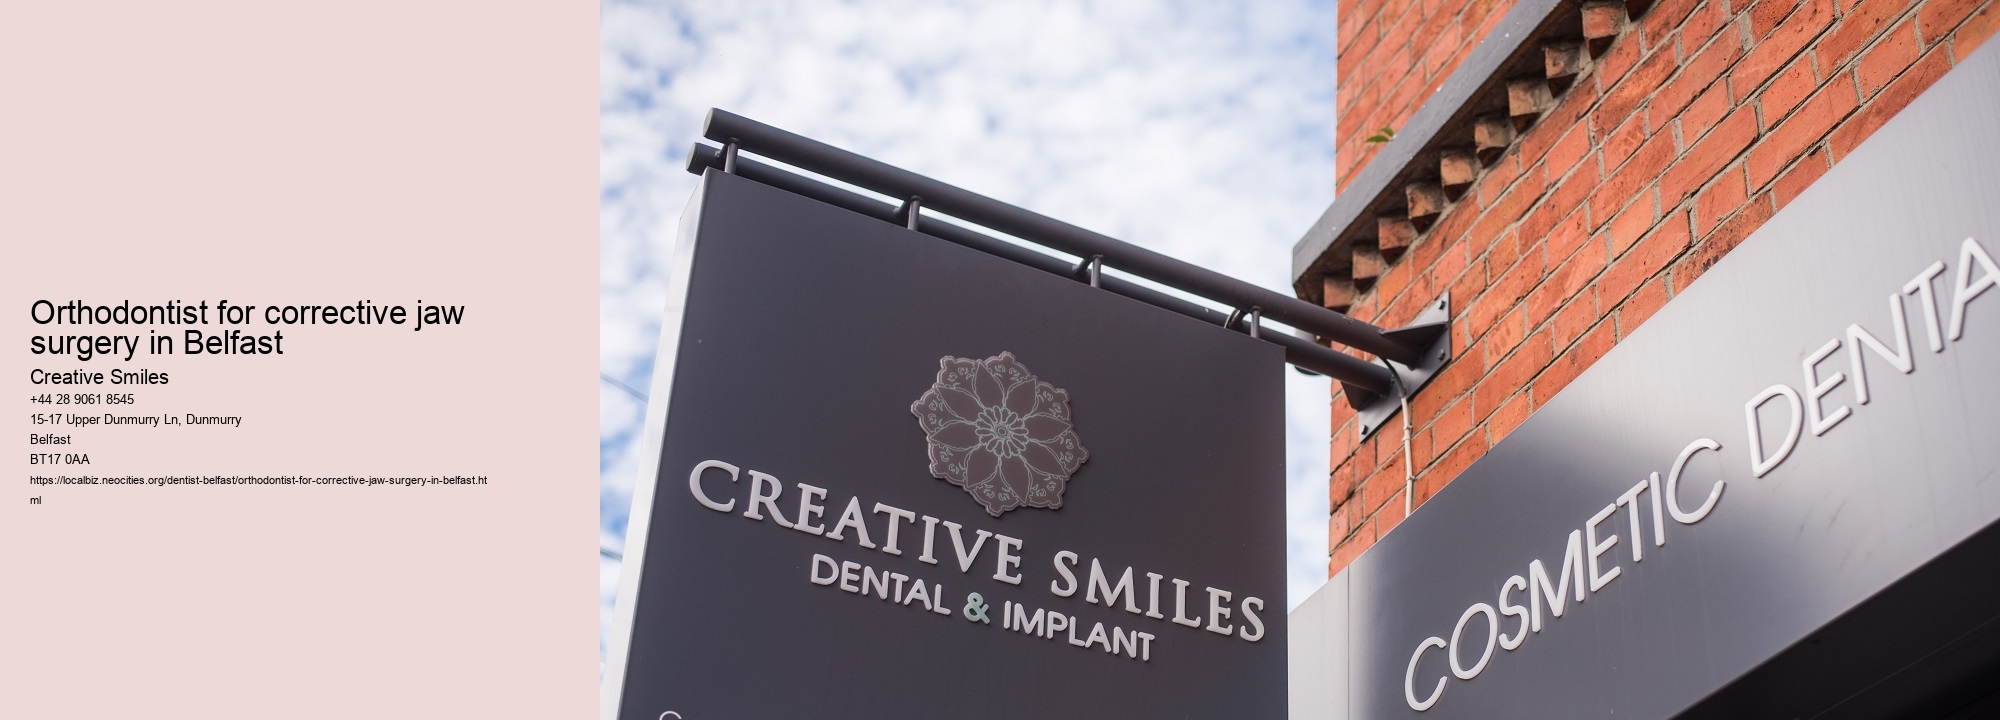 Orthodontist for corrective jaw surgery in Belfast